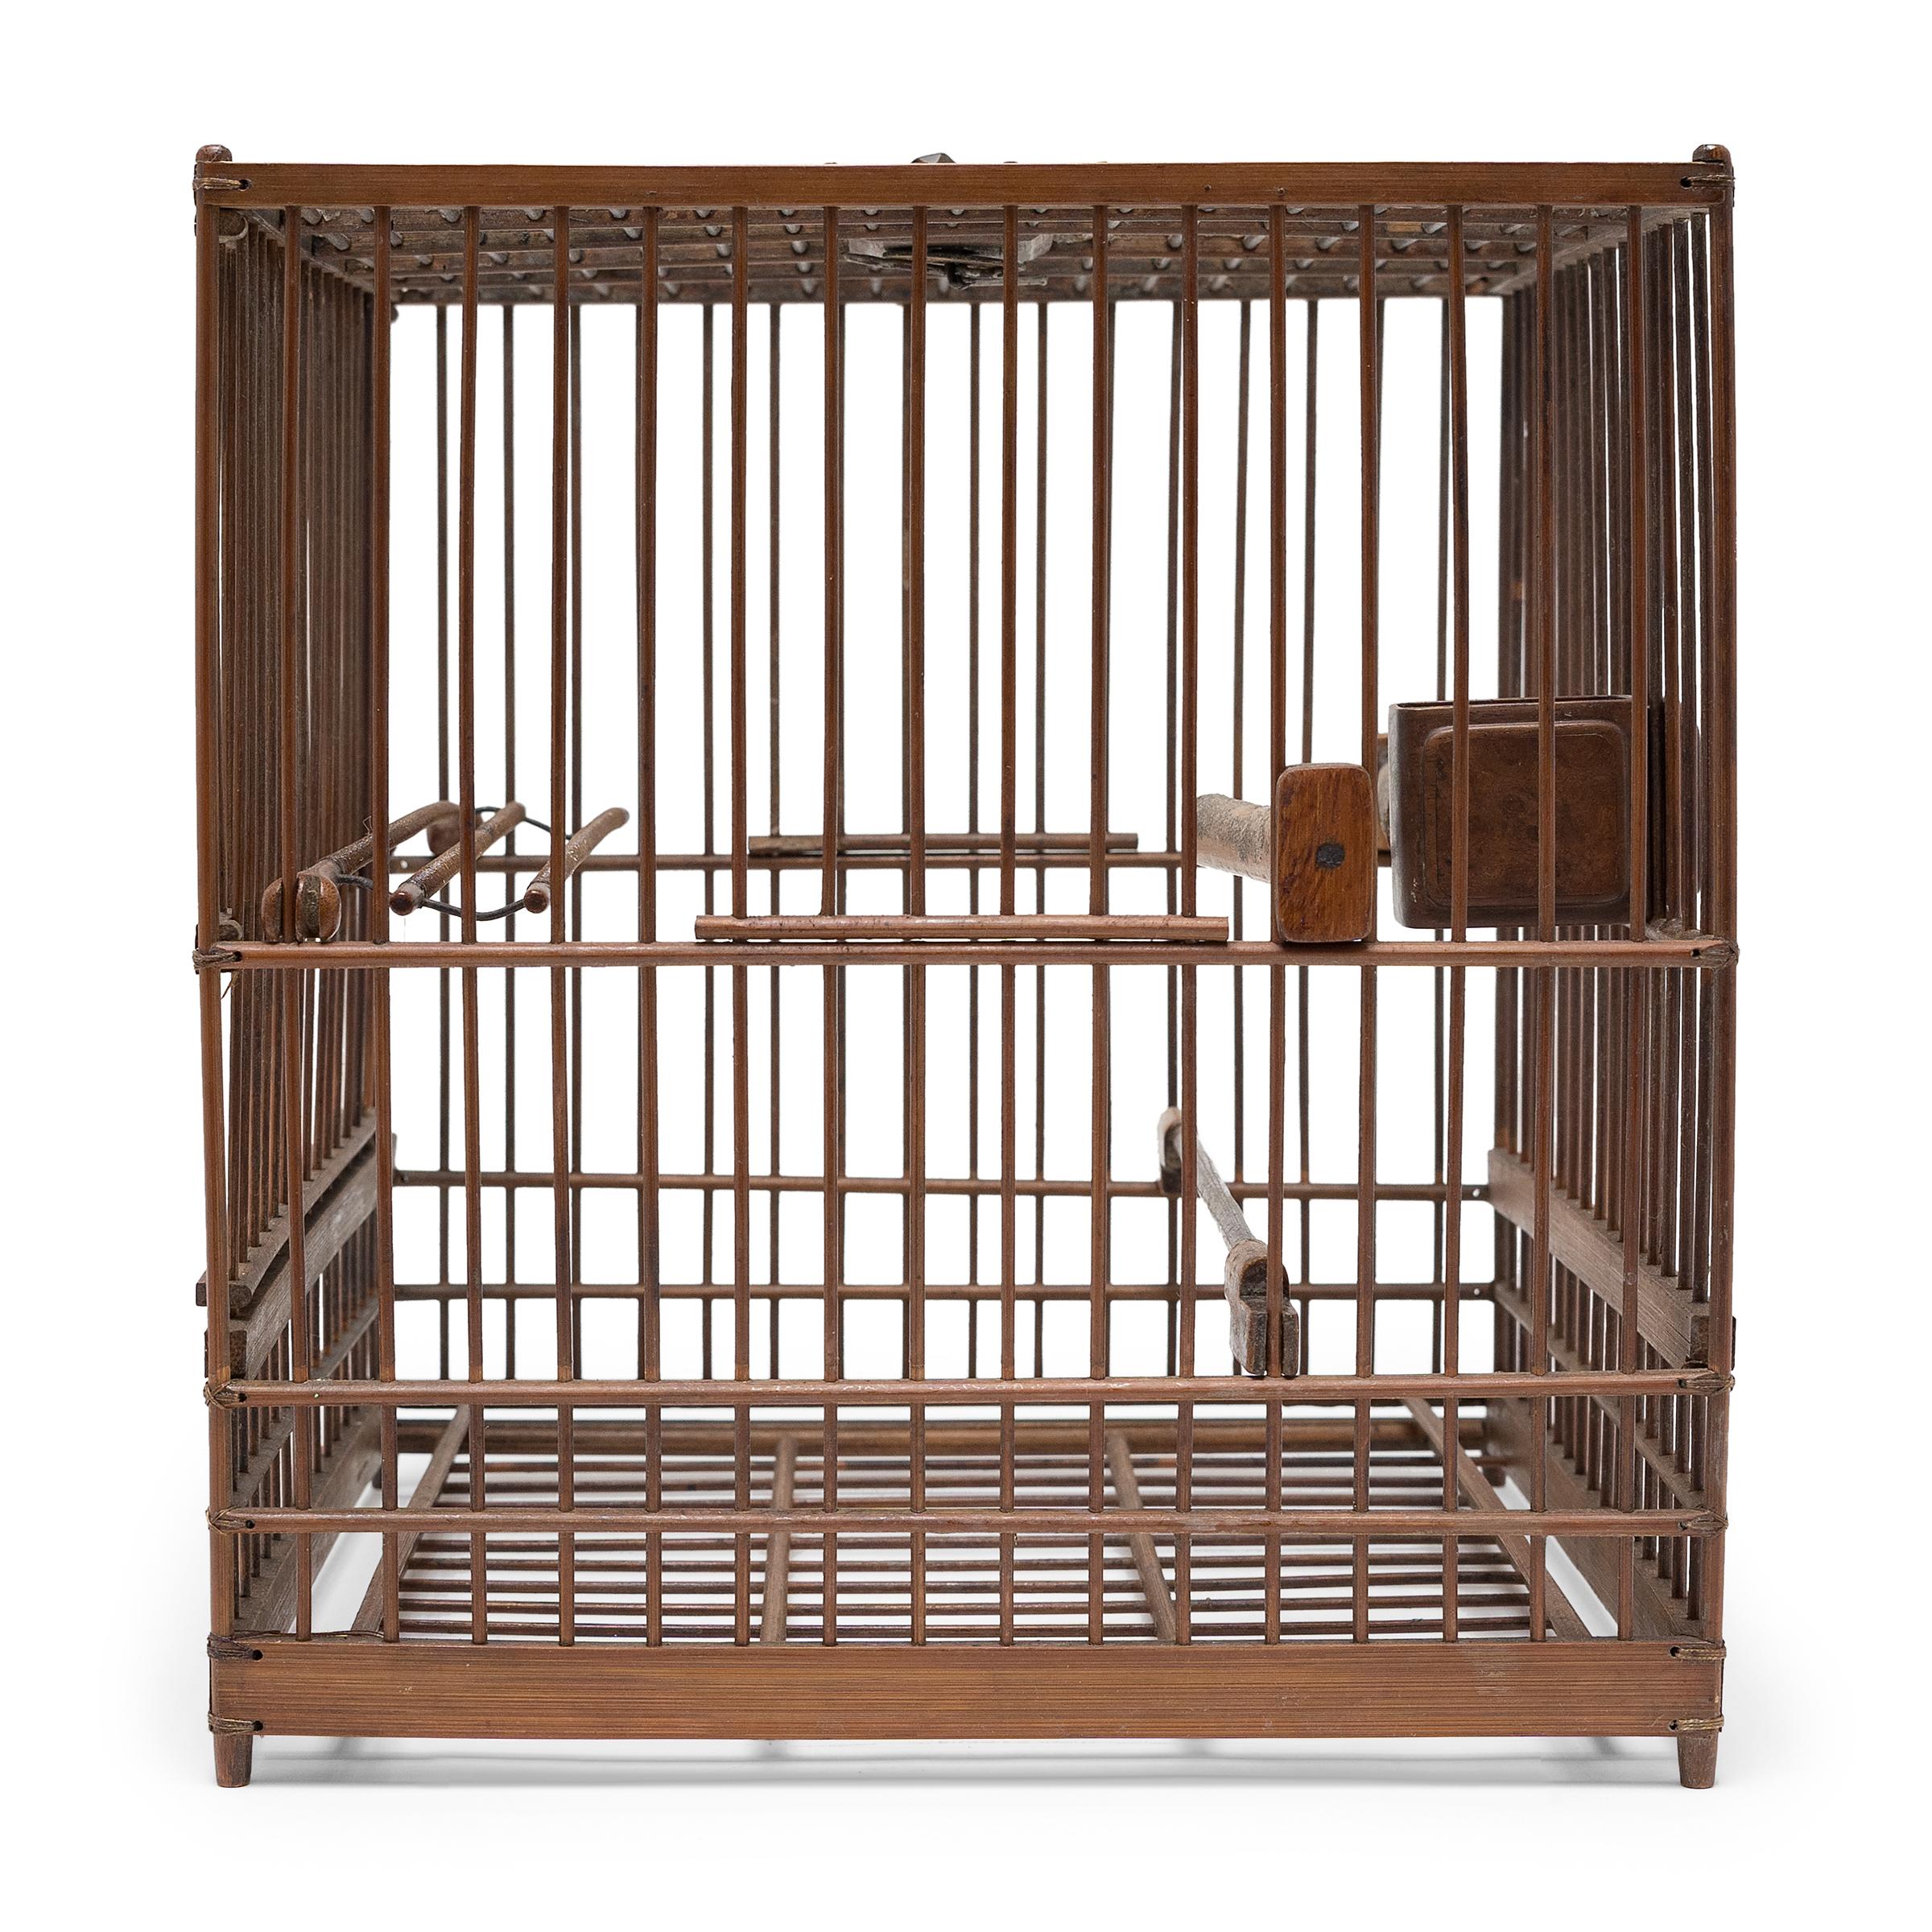 This delicate 19th-century birdcage was once home to the tiny pet bird of a Qing-dynasty aristocrat. The square cage is expertly crafted of thin bamboo rods and held together with waxed thread at the corners. The cage opens by a sliding side door